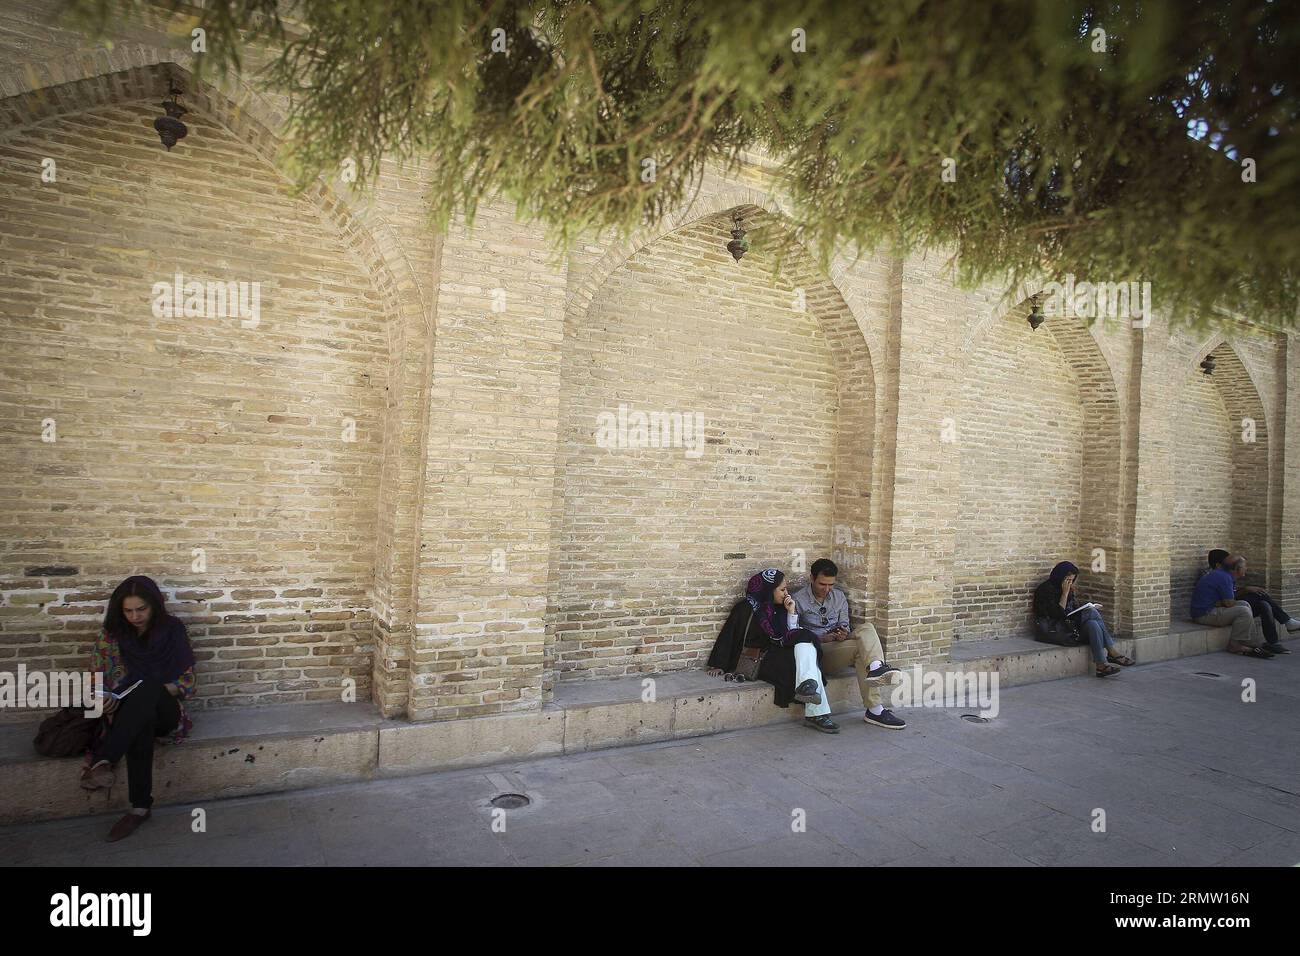 SHIRAZ, Sept. 26, 2014 -- People read poems of Hafez as they sit around the tomb of Persian mystic poet Hafez in southern city of Shiraz on Sept. 26, 2014. Hafez collected poems are regarded as a pinnacle of Persian literature and are to be found in the homes of most people in Iran and Afghanistan. ) (cy) IRAN-SHIRAZ-CULTURE-HAFEZ AhmadxHalabisaz PUBLICATIONxNOTxINxCHN   Shiraz Sept 26 2014 Celebrities Read Poems of Hafez As They Sit Around The Tomb of Persian Mystic Poet Hafez in Southern City of Shiraz ON Sept 26 2014 Hafez collected Poems are regarded As a Pinnacle of Persian Literature and Stock Photo